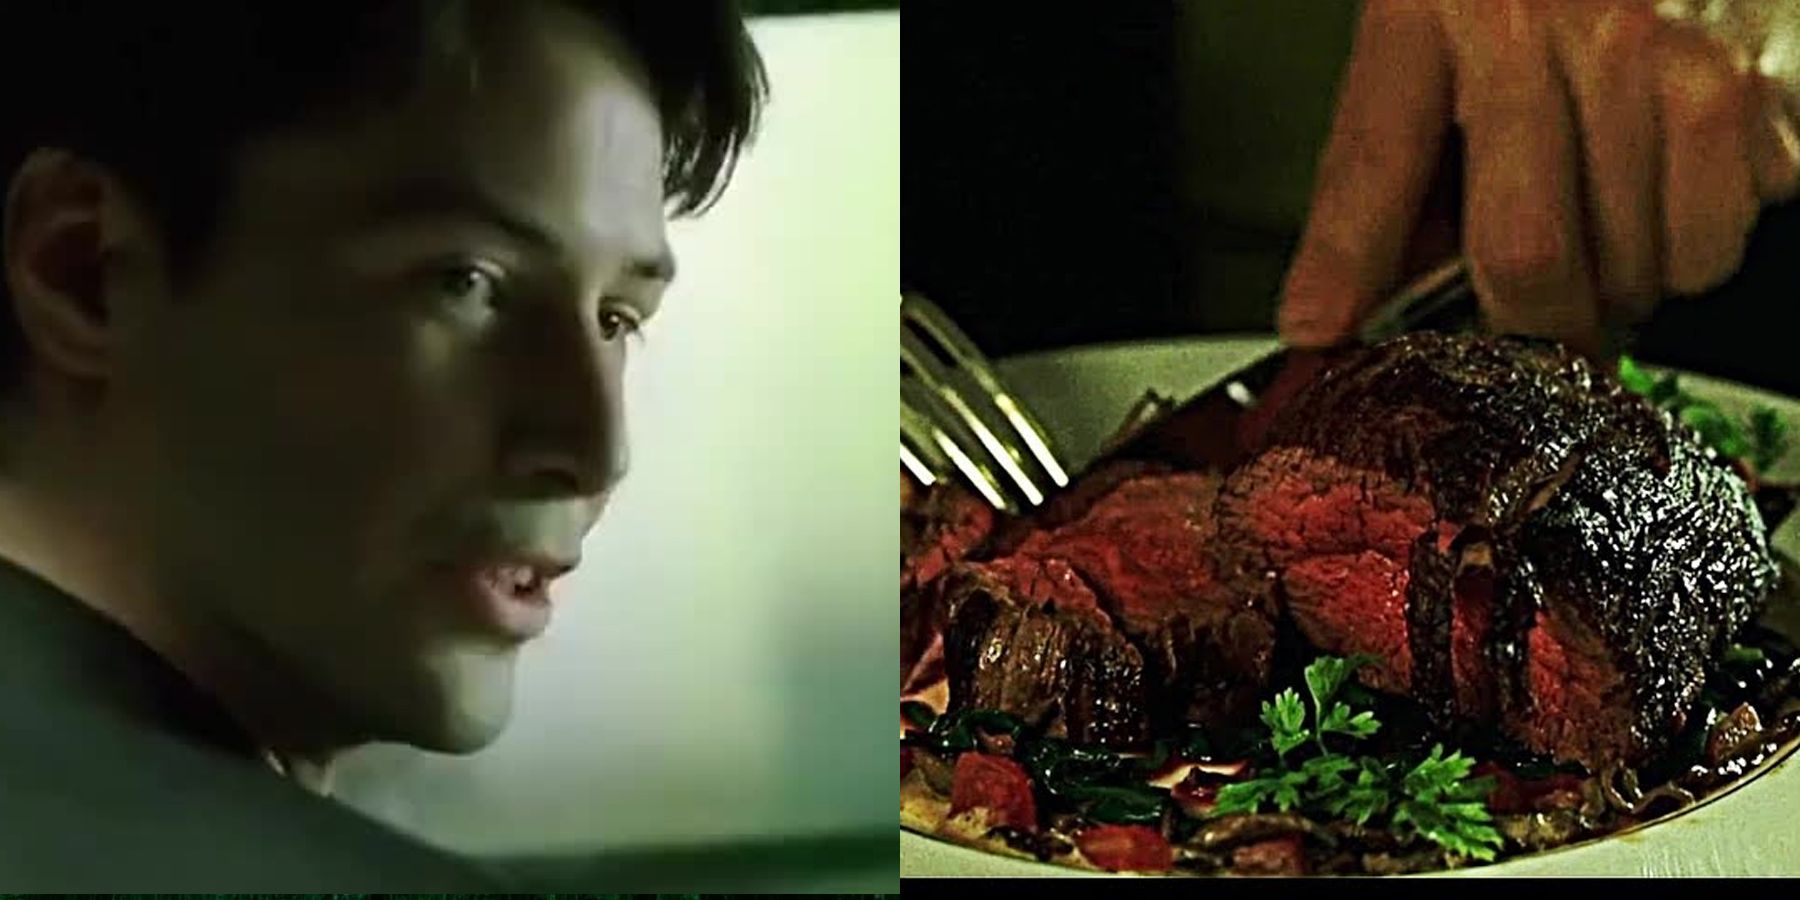 Neo talking about noodles and Cypher eating steak in Matrix 1